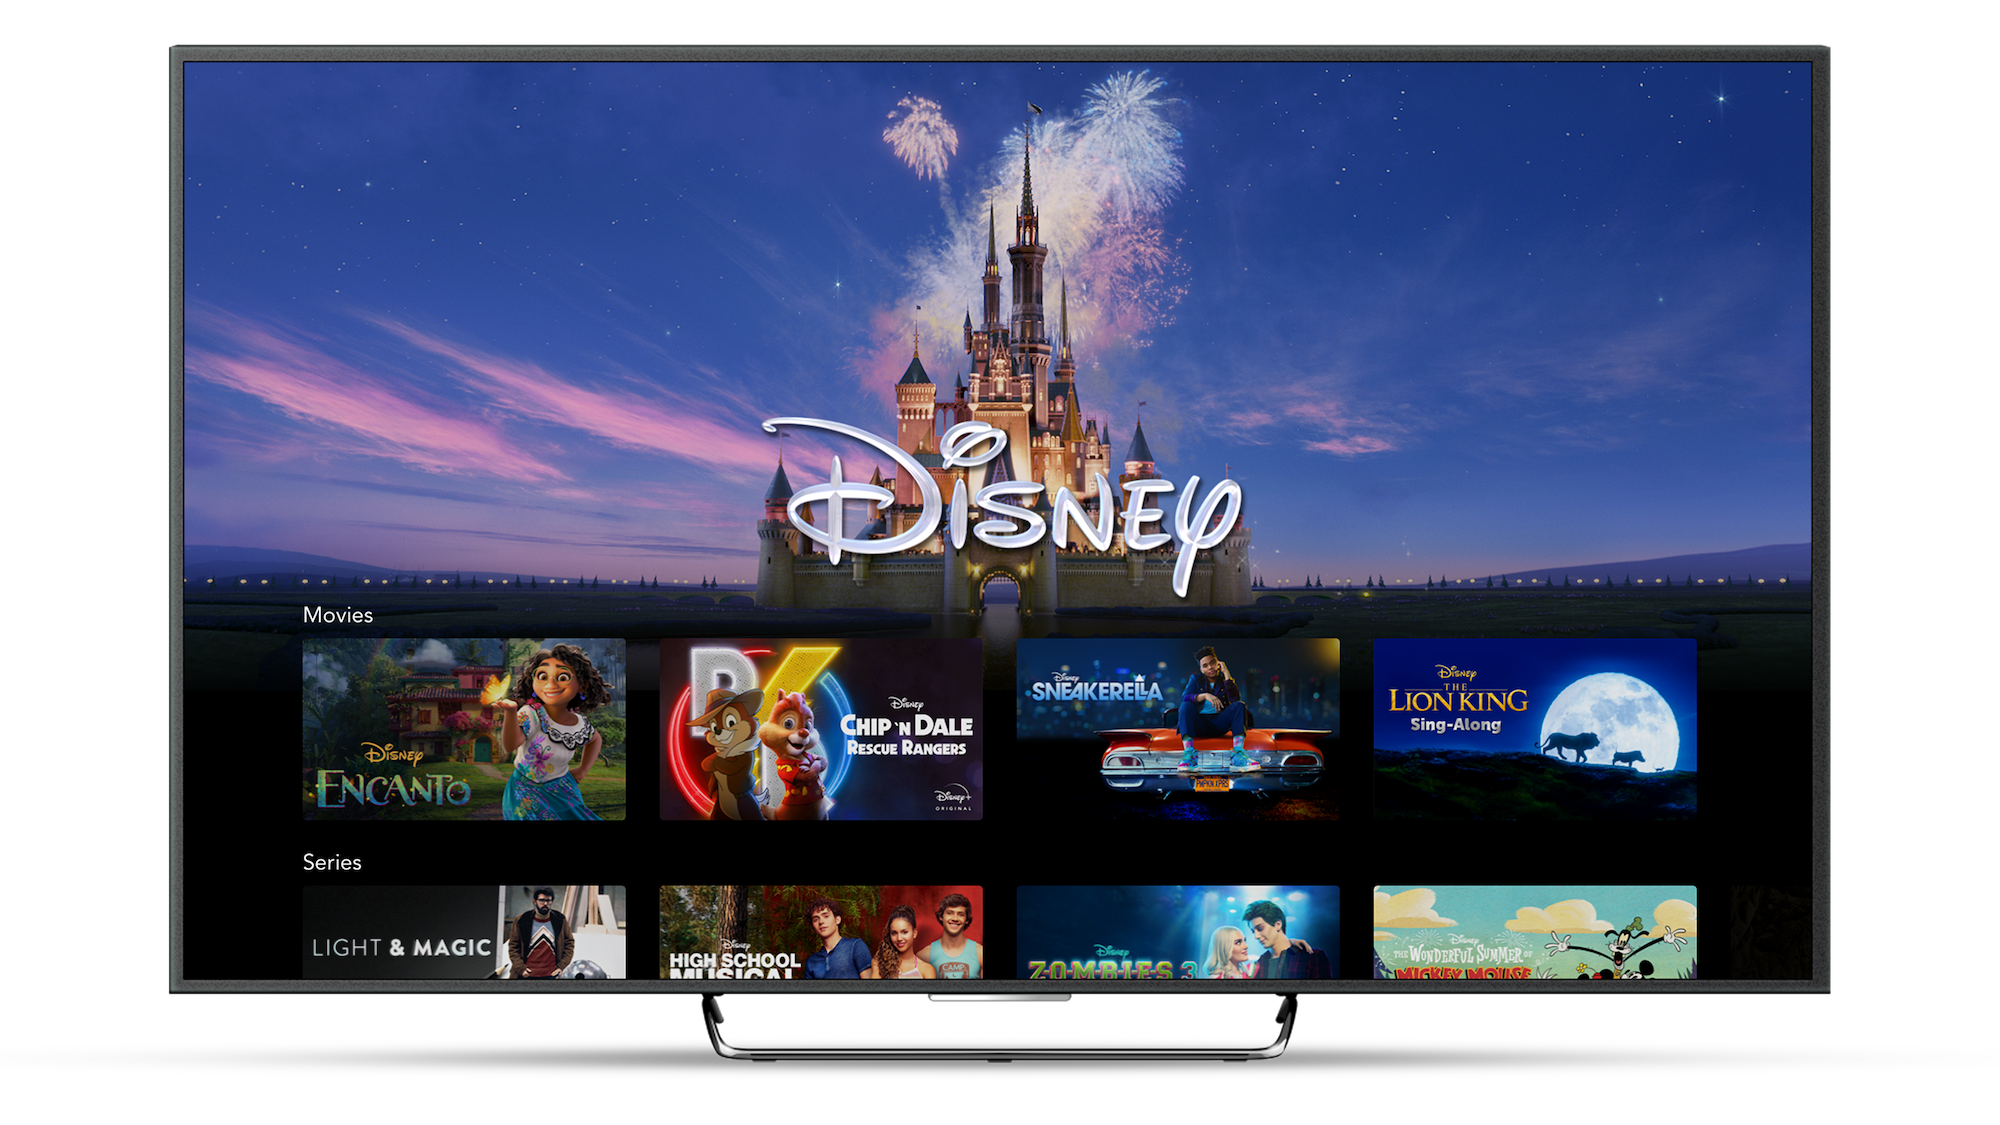 Disney+ Brand Landing Page on Connected TV Device